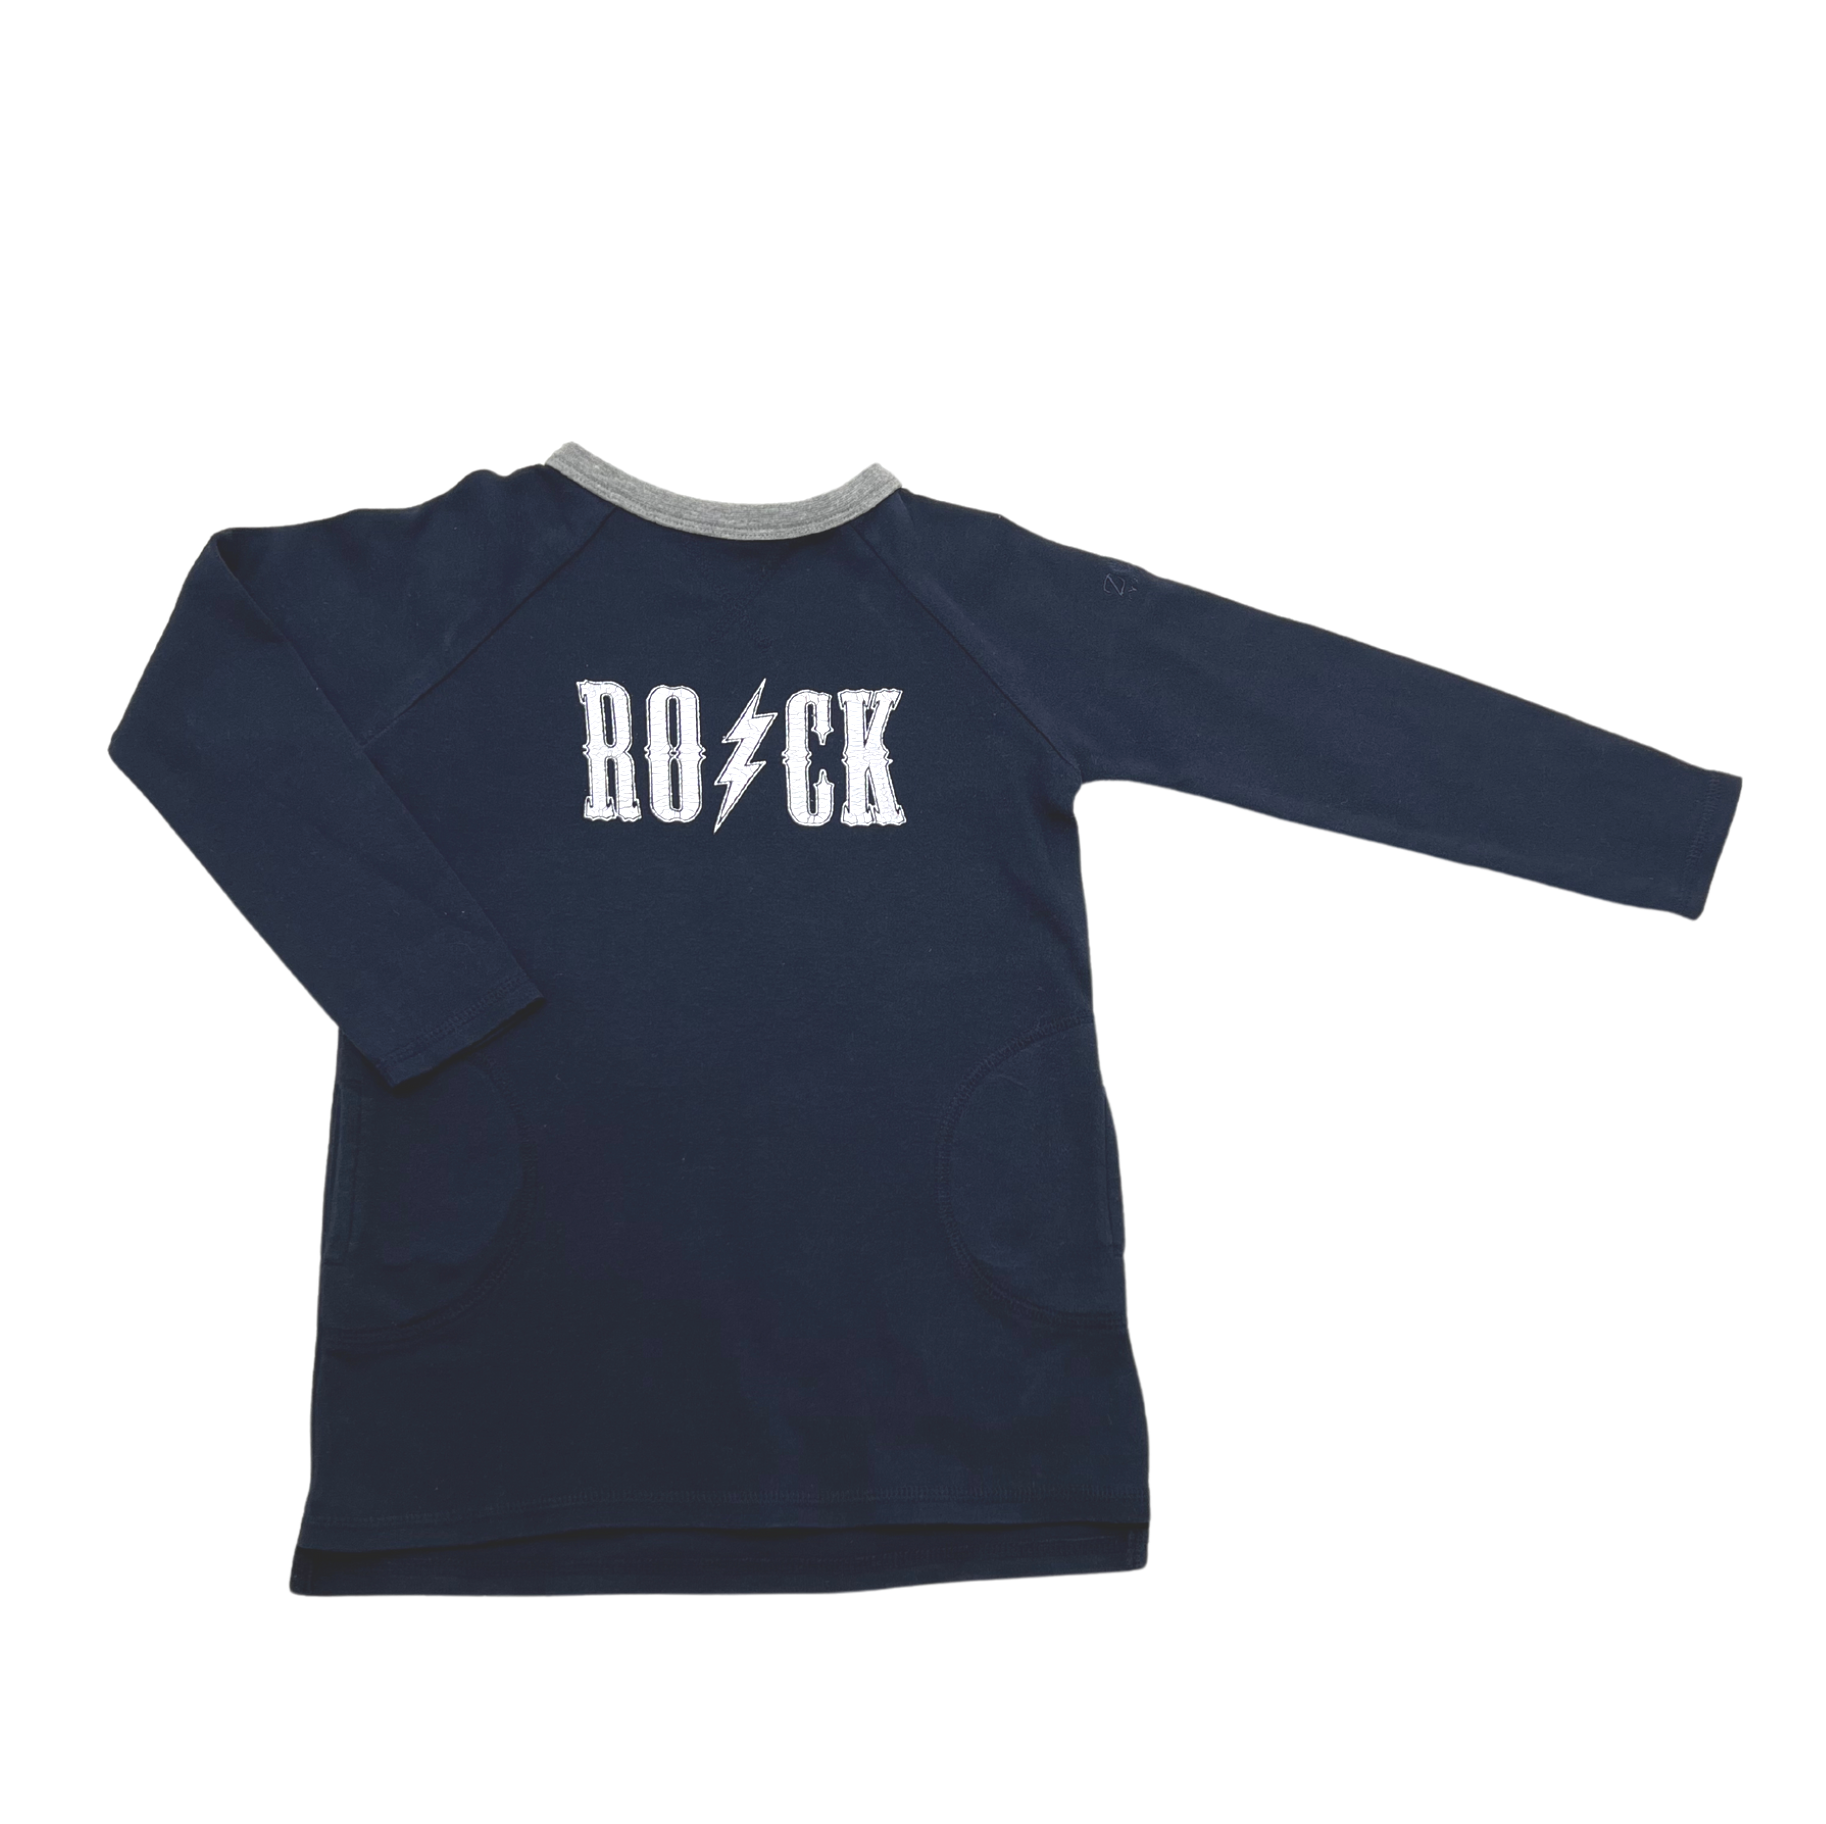 ZADIG &amp; VOLTAIRE - "Rock" dress - 4 years old